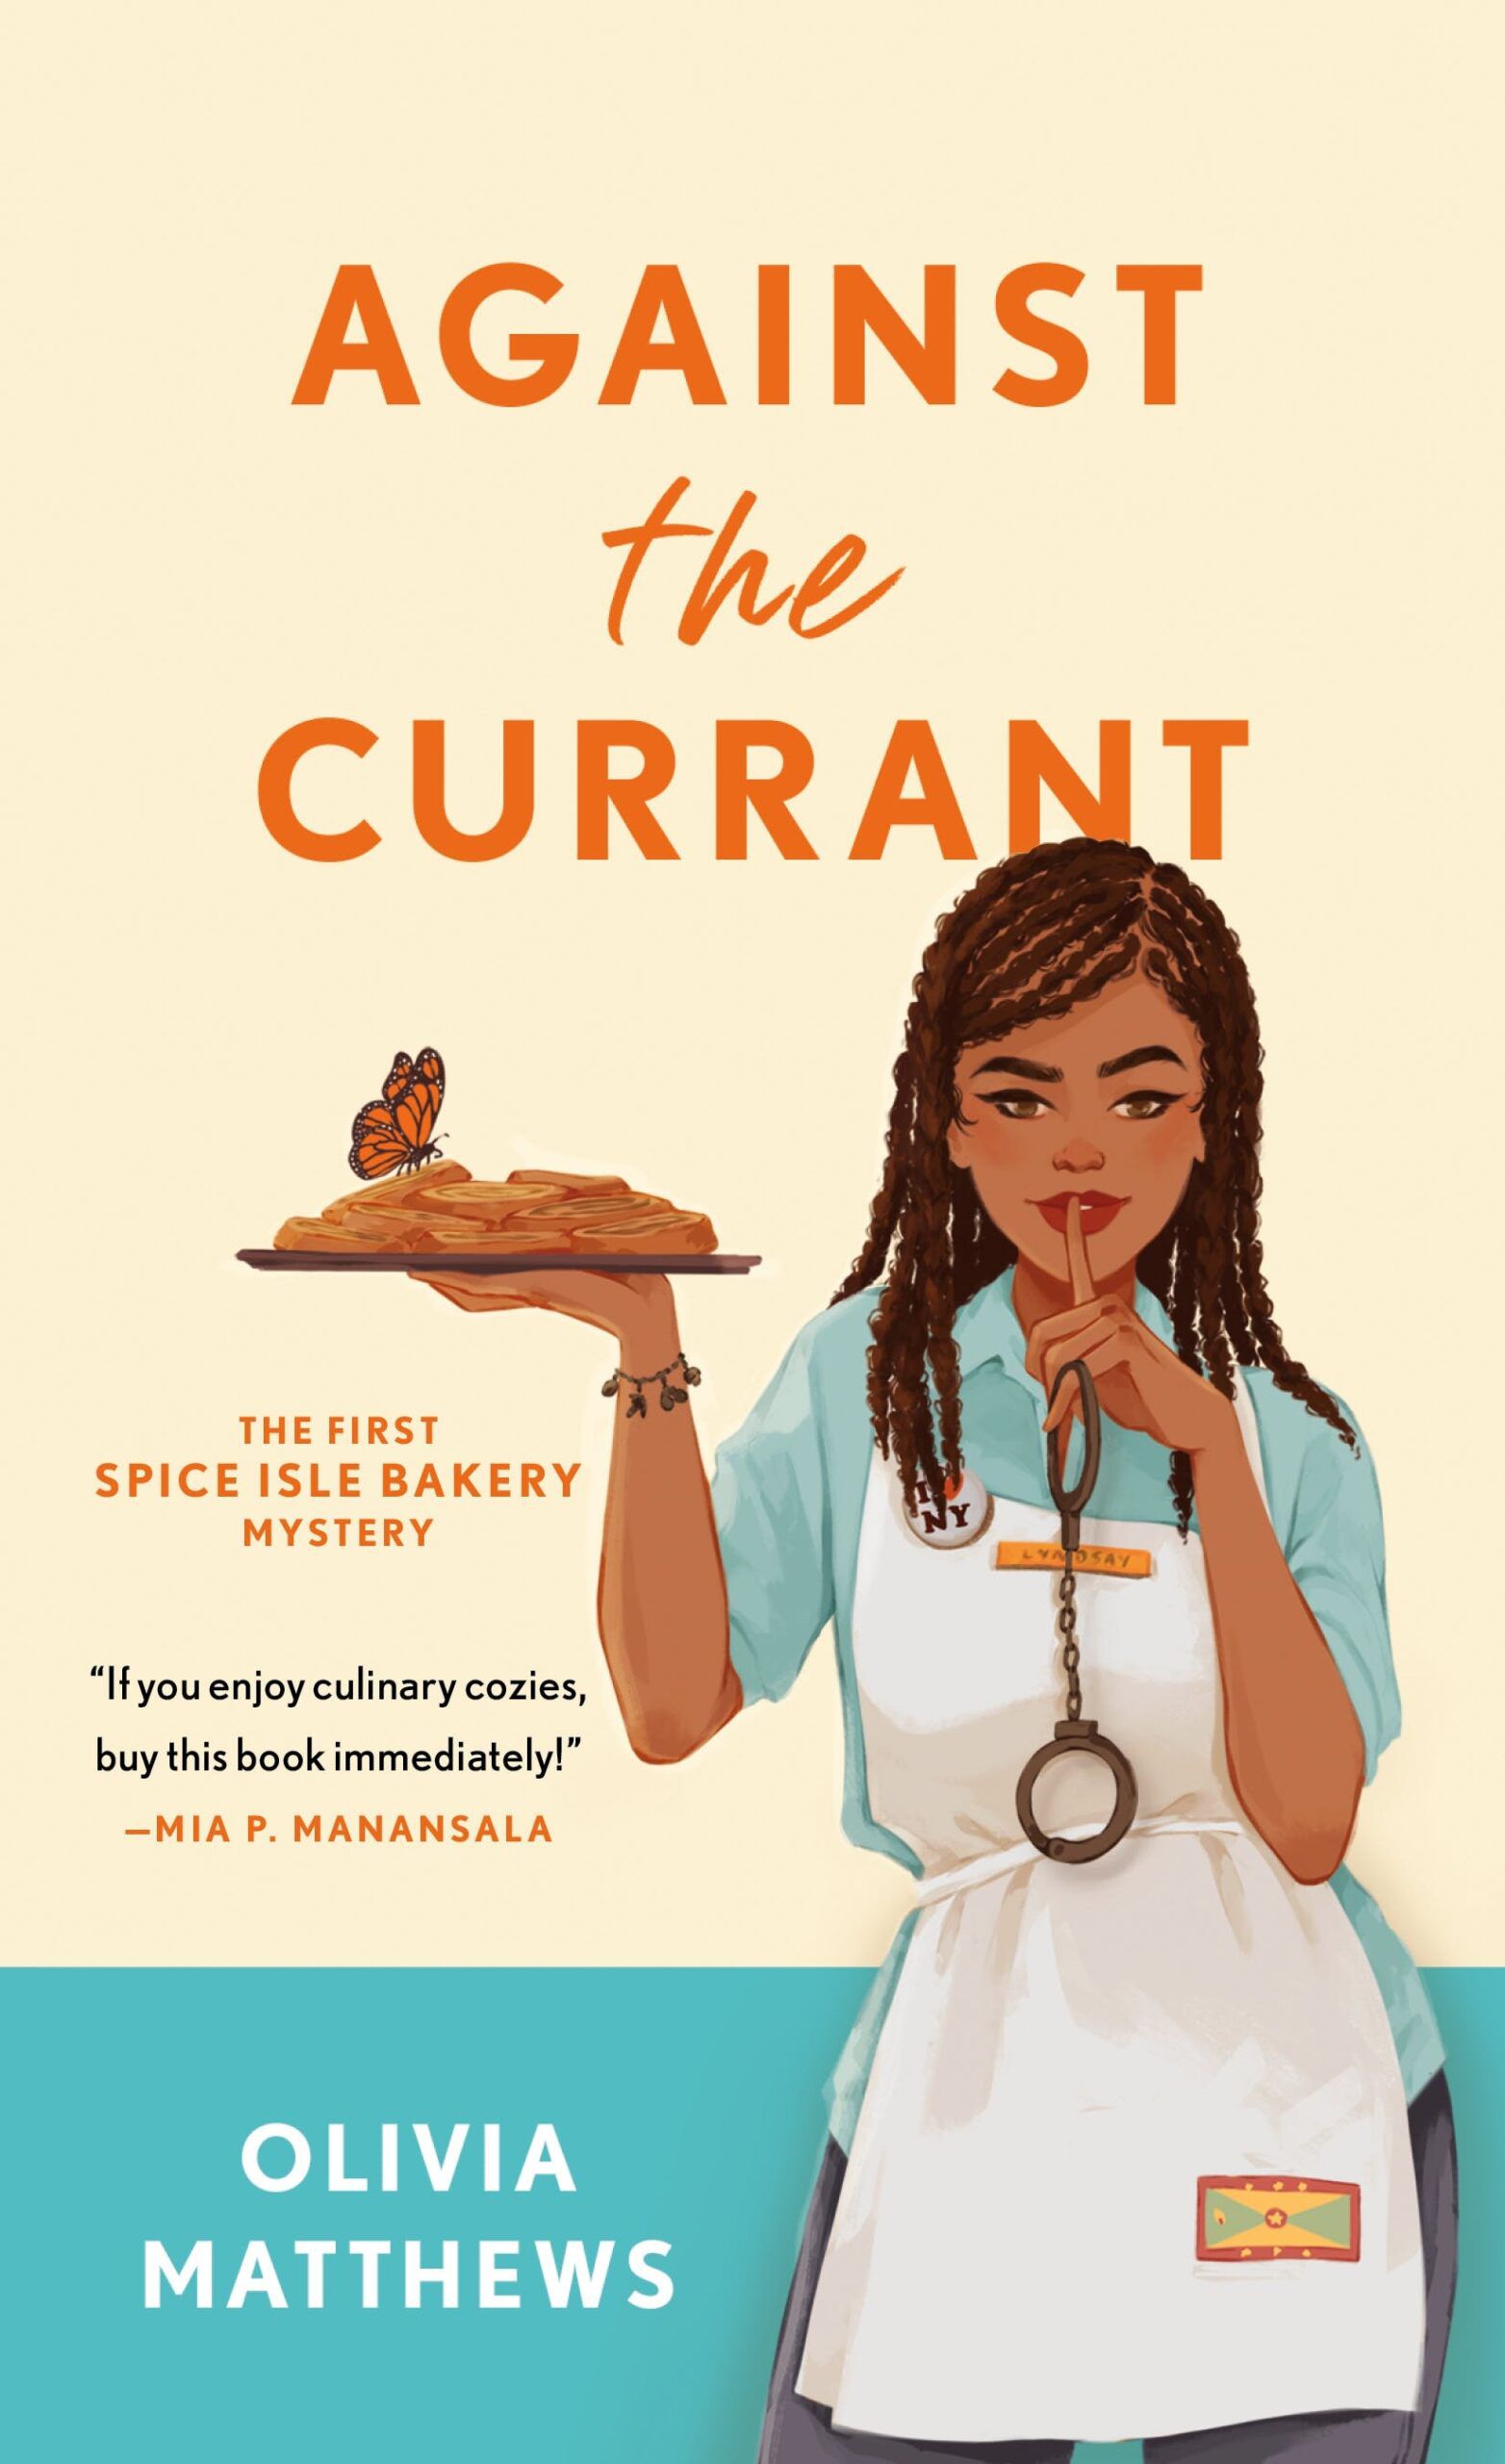 Against the Currant book cover